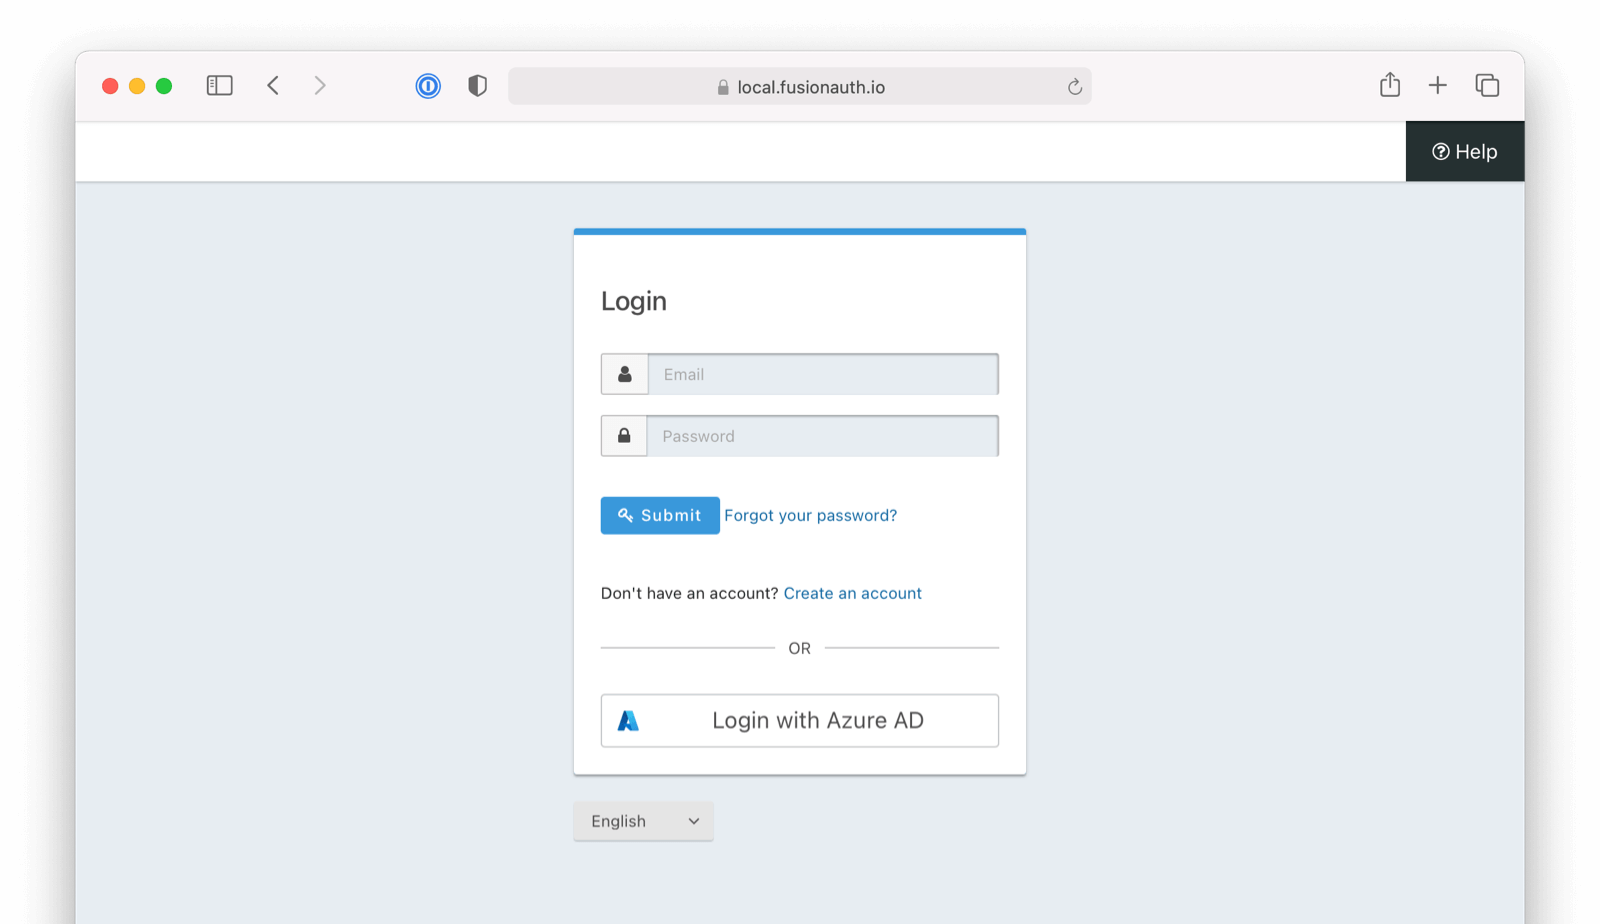 Login with Azure AD